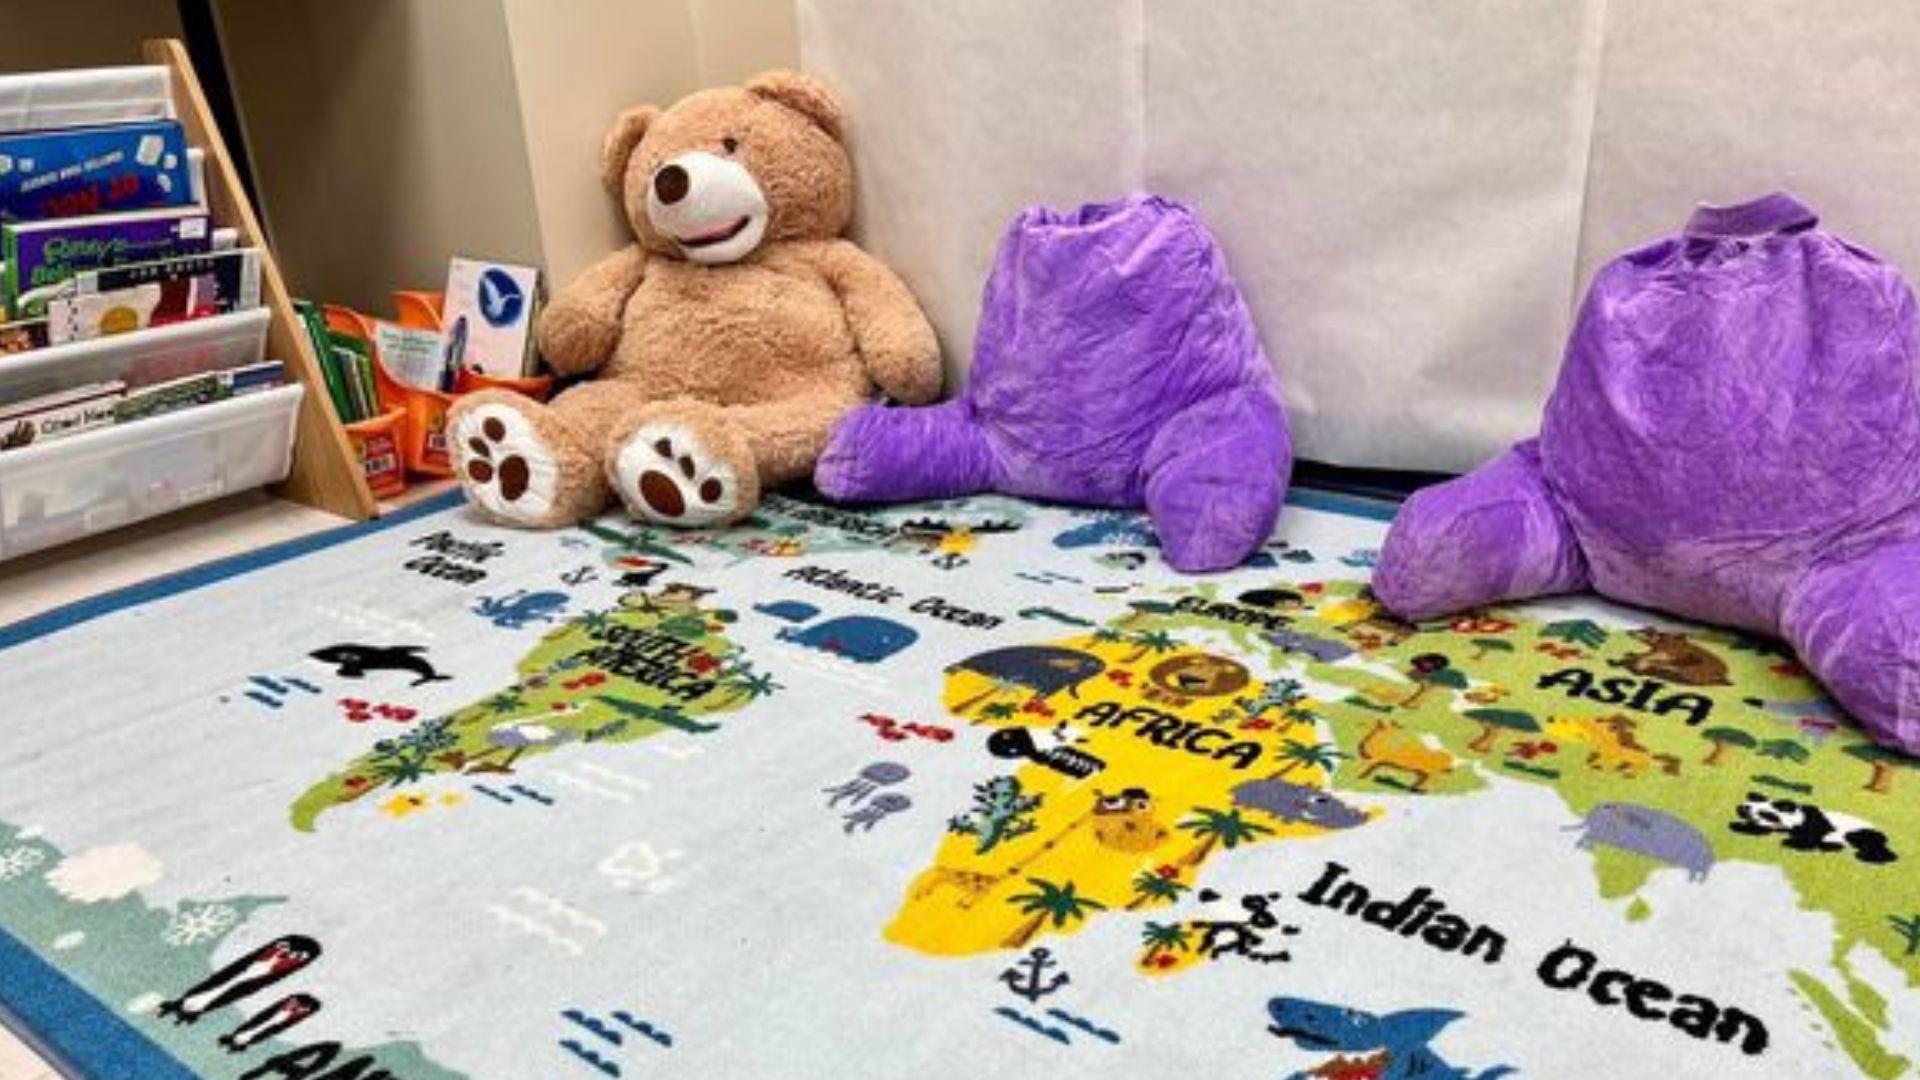 Classroom with stuffed animals and a rug.